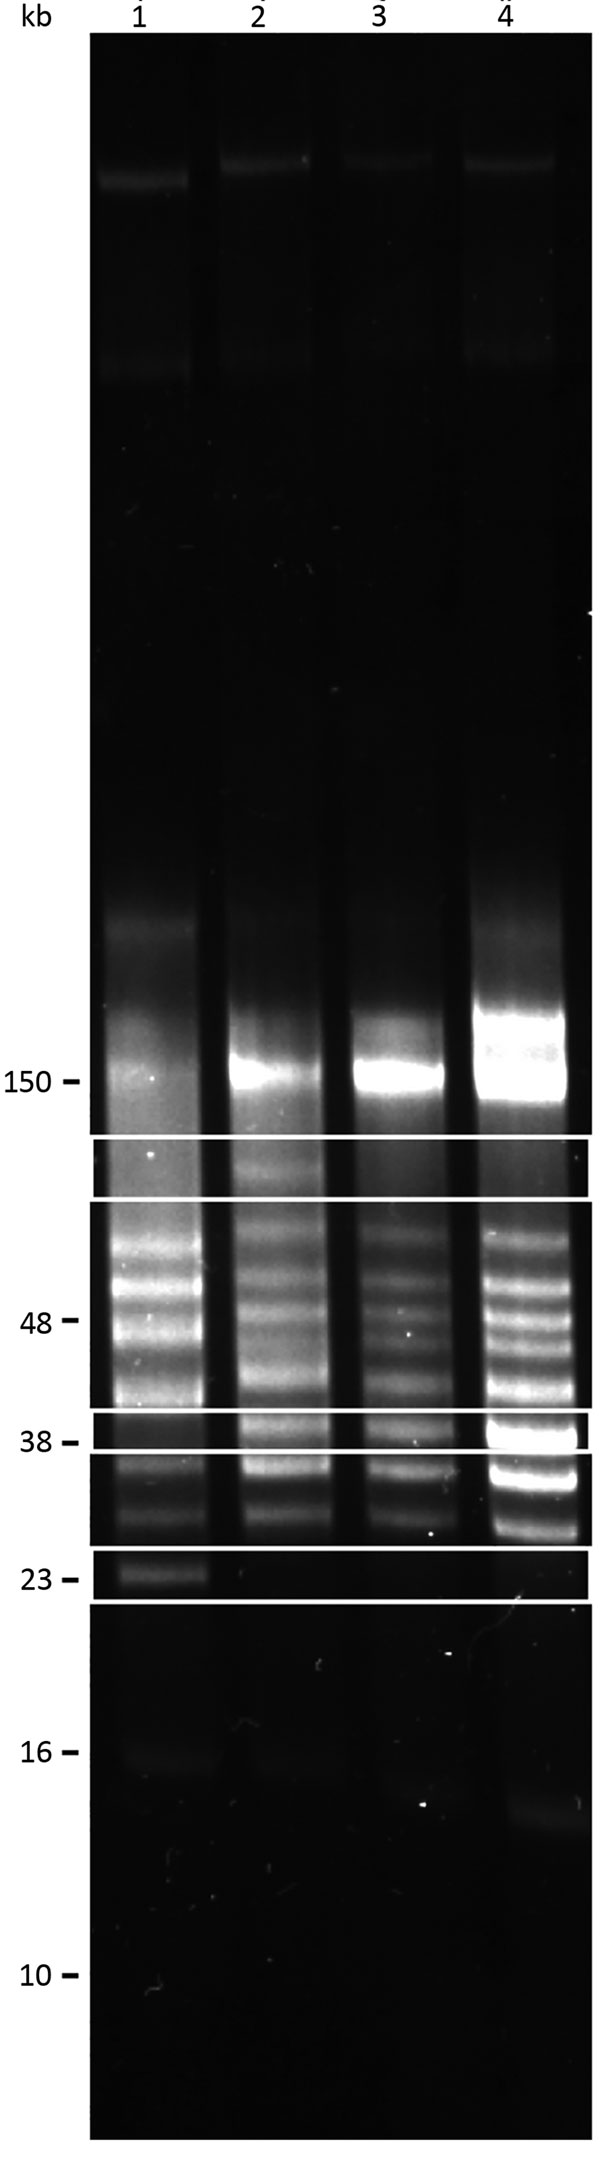 Reversed-field gel electrophoresis of Borrelia turicatae isolates collected from Ornithodors turicata ticks, Austin, Texas, USA (BRP1, BRP1a, and BRP2) and an isolate from previously field-collected ticks (91E135) (9). Lane 1, 91E135; lane 2, BRP1; lane 3, BRP1a; lane 4, BRP2. White boxes indicate a plasmid in BRP1 that is absent from the other strains (top); plasmids unique to BRP1, BRP1a, and BRP2 (middle); and a plasmid in 91E135 strain that is absent in isolates from Austin (bottom).